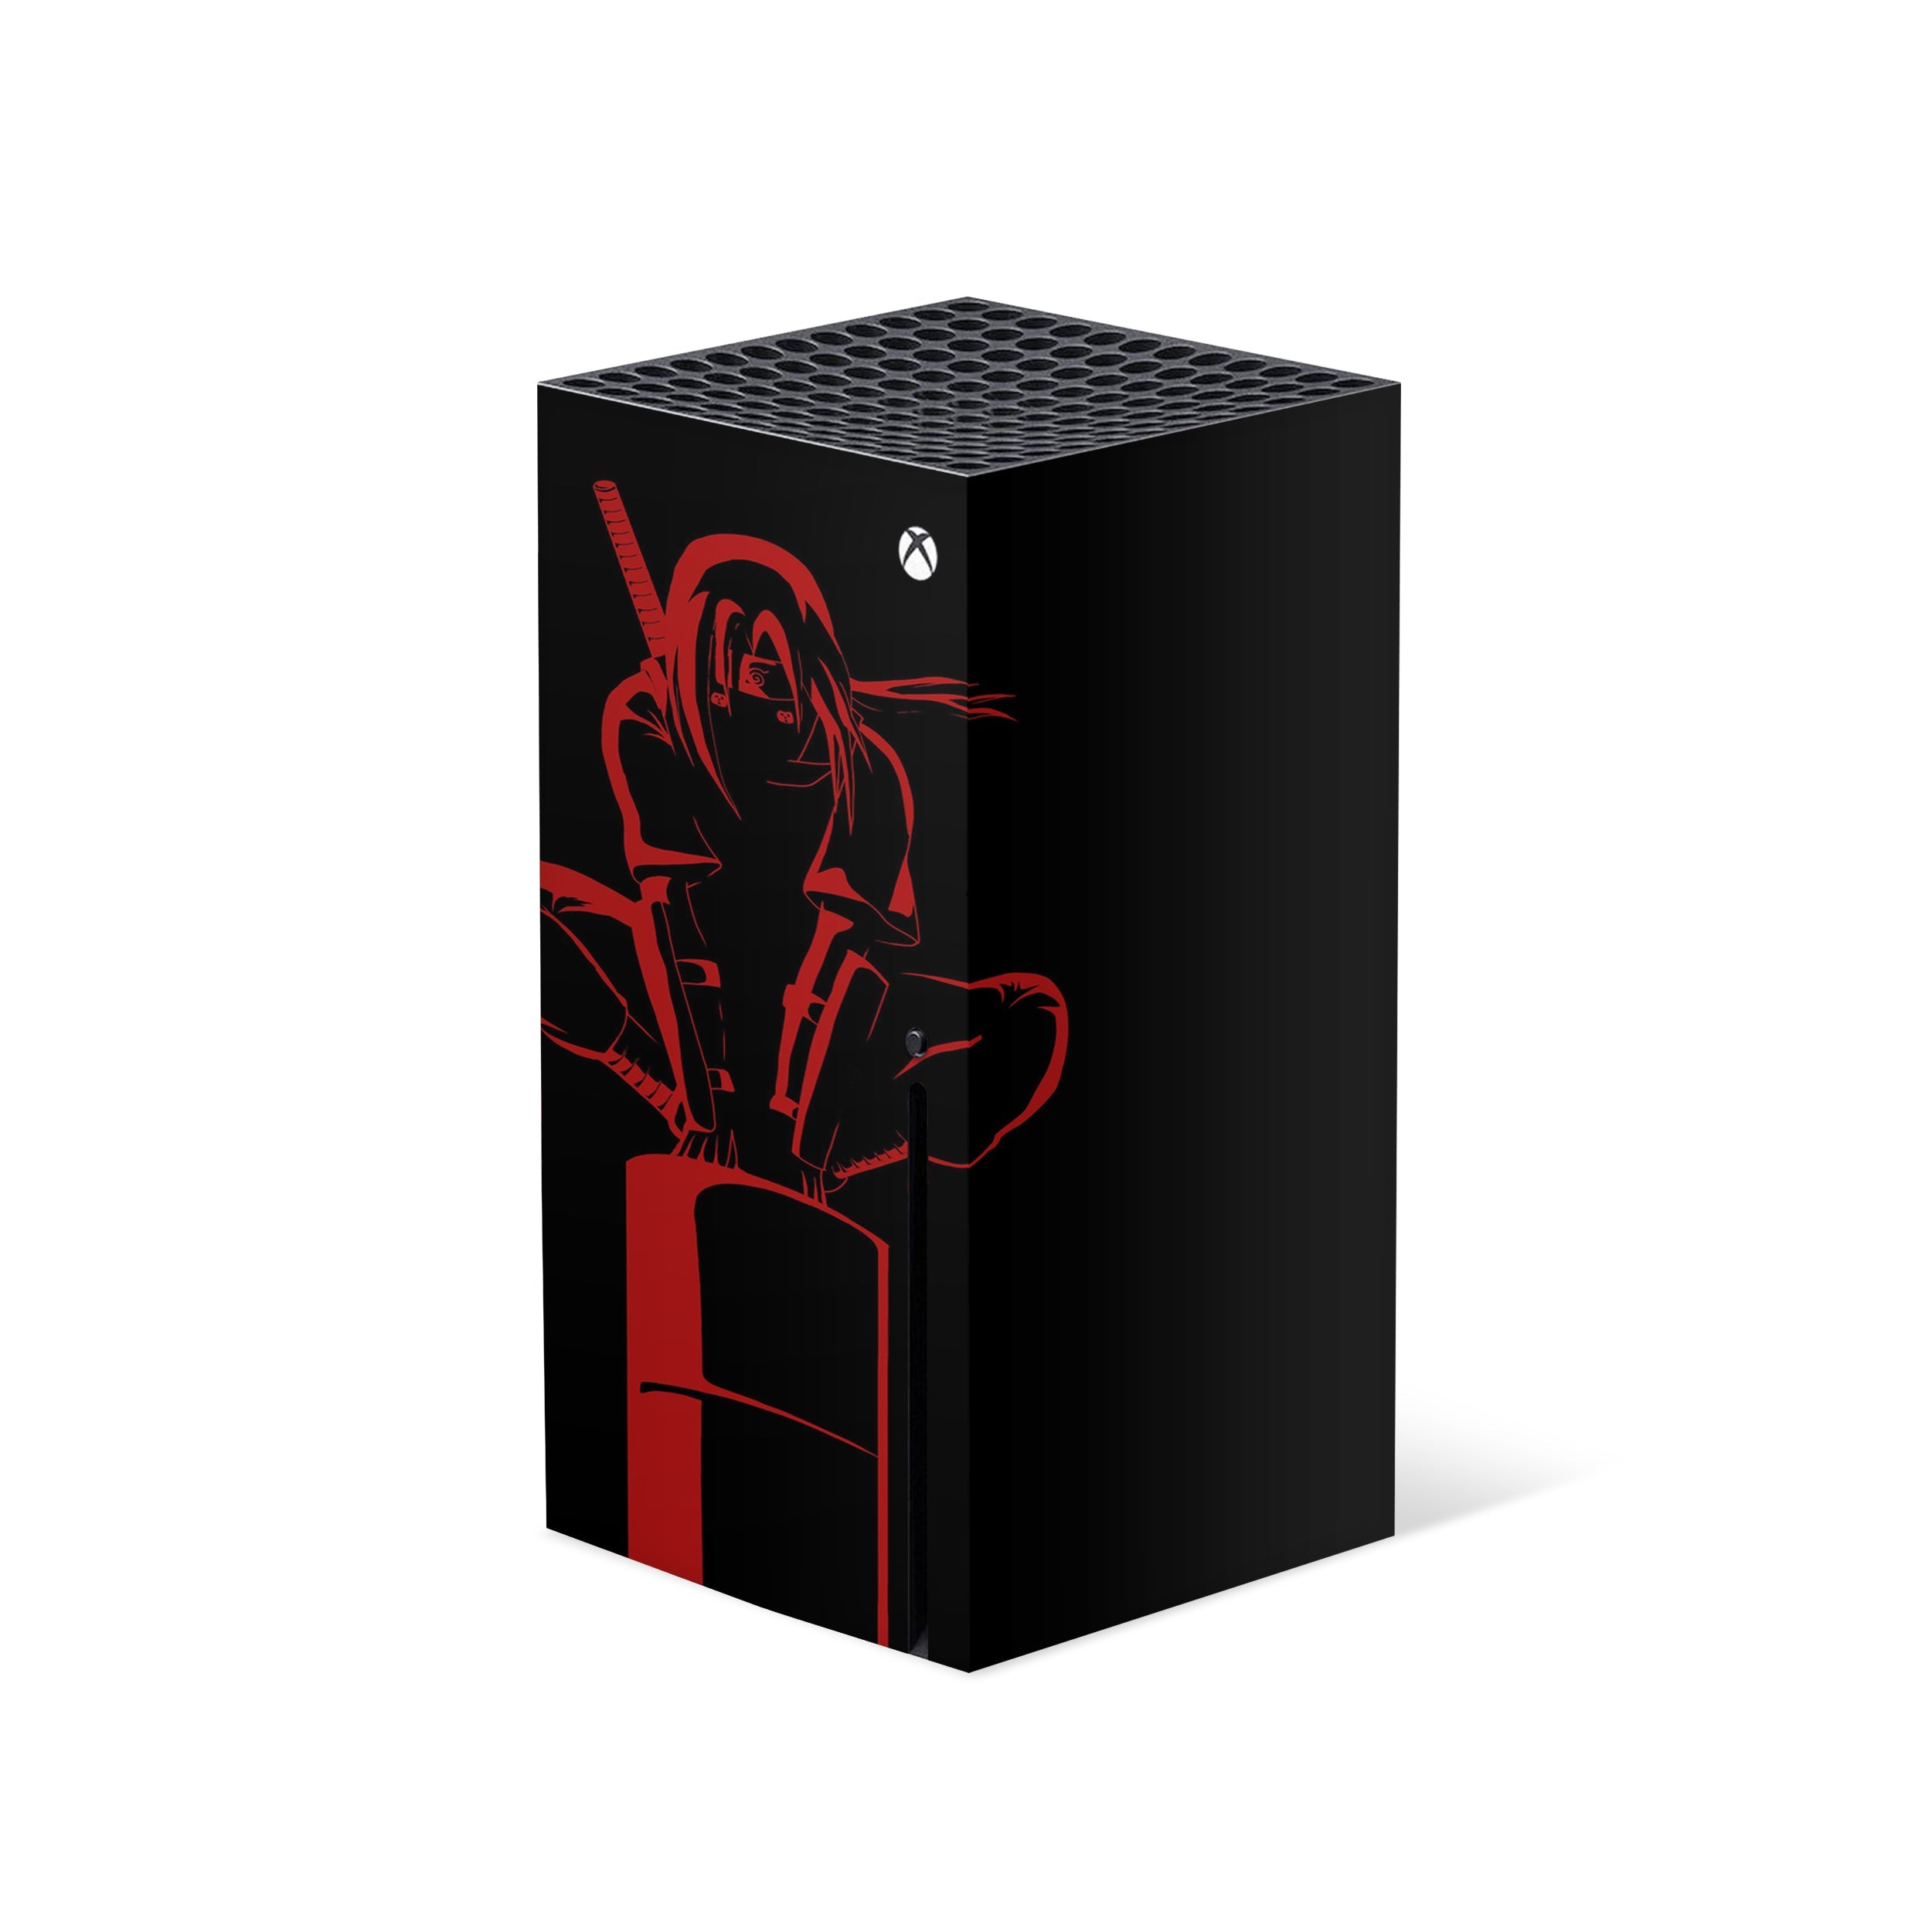 A video game skin featuring a Naruto Itachi design for the Xbox Series X.